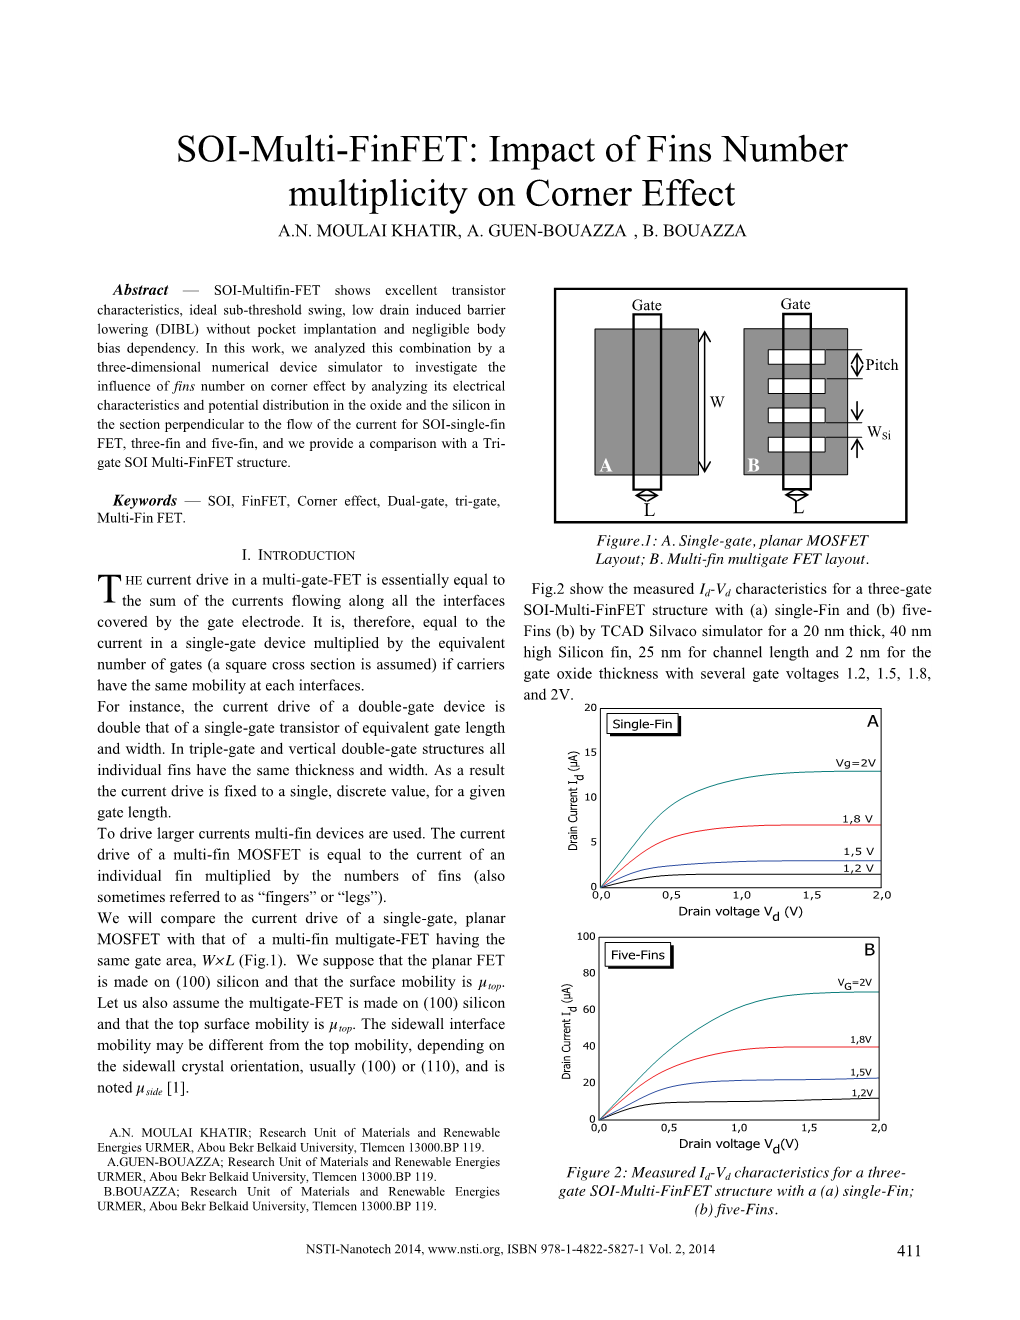 SOI-Multi-Finfet: Impact of Fins Number Multiplicity on Corner Effect A.N